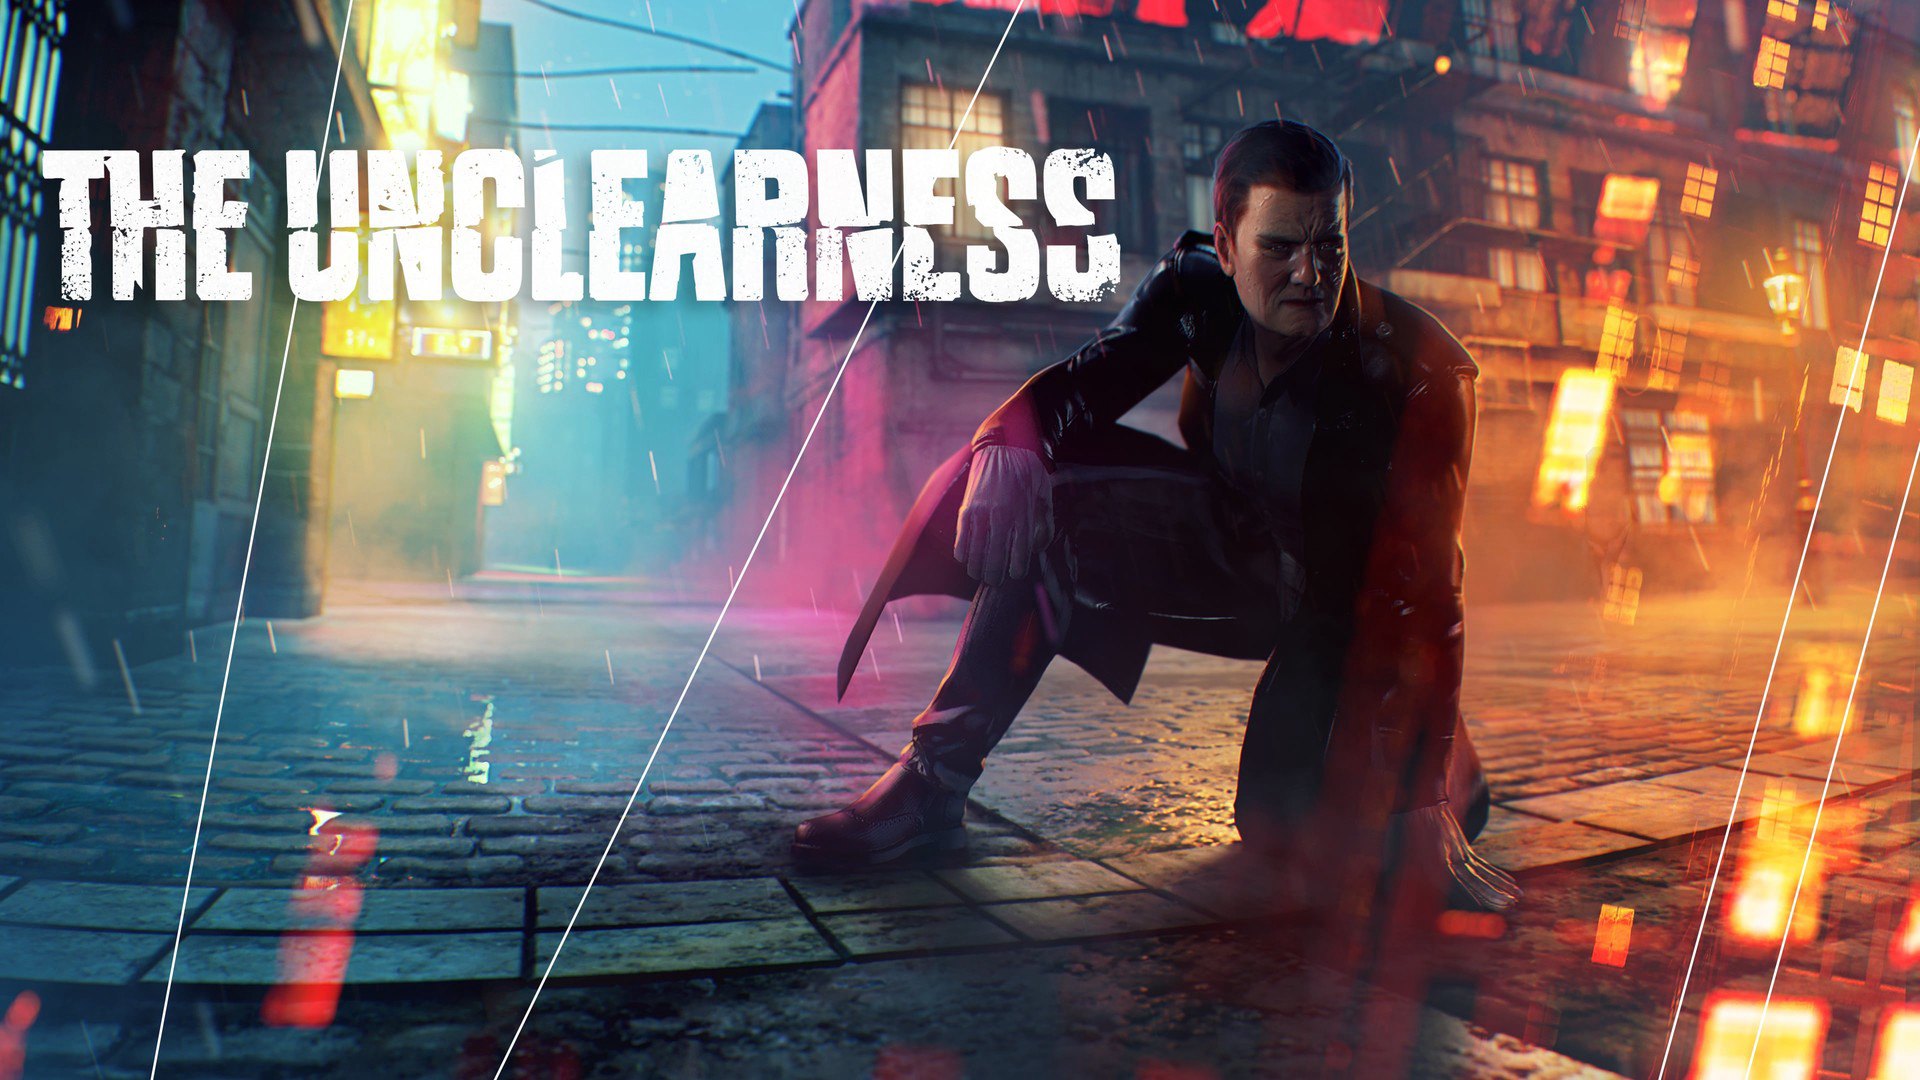 THE UNCLEARNESS Steam CD Key 6.77 $